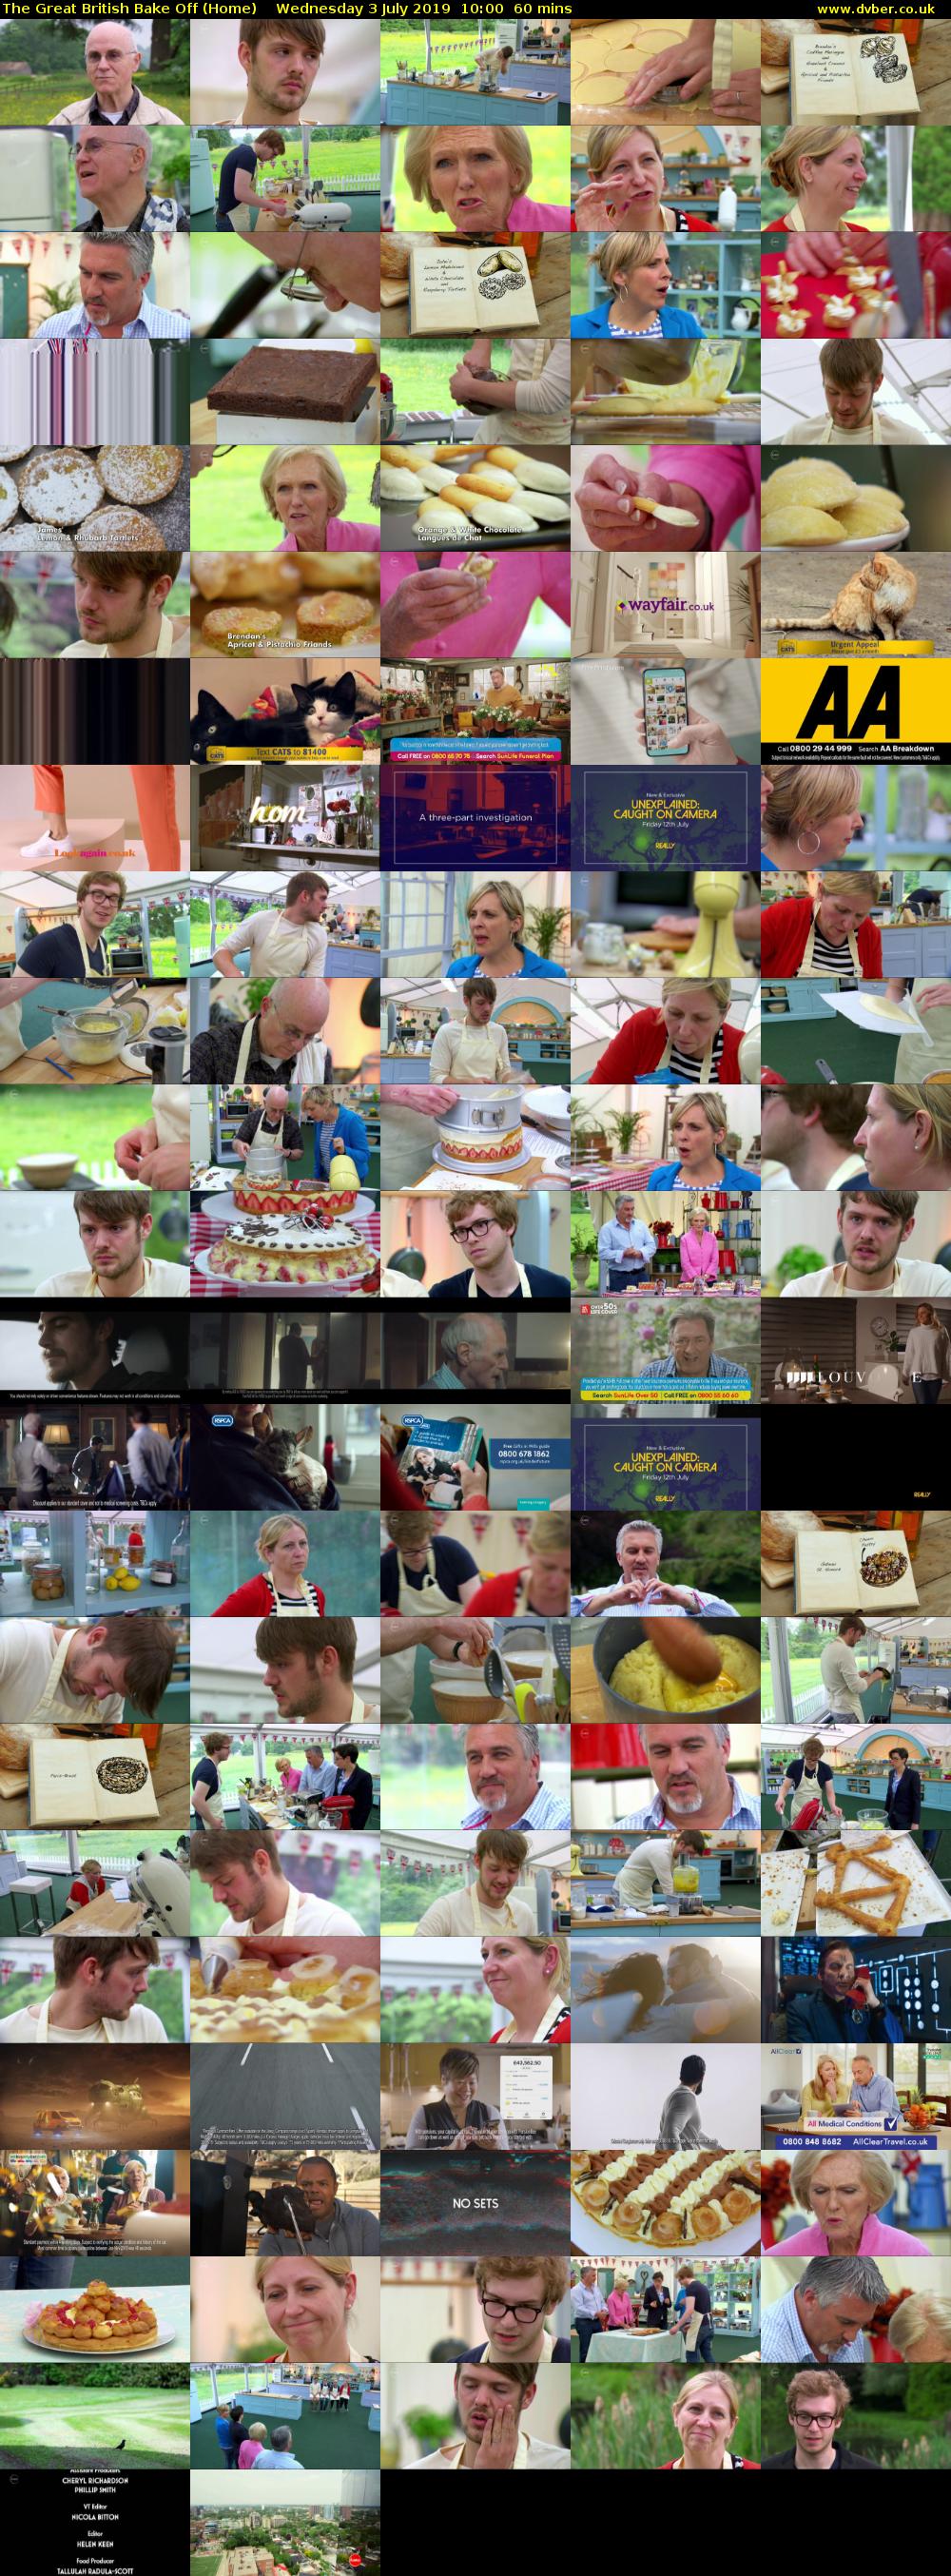 The Great British Bake Off (Home) Wednesday 3 July 2019 10:00 - 11:00